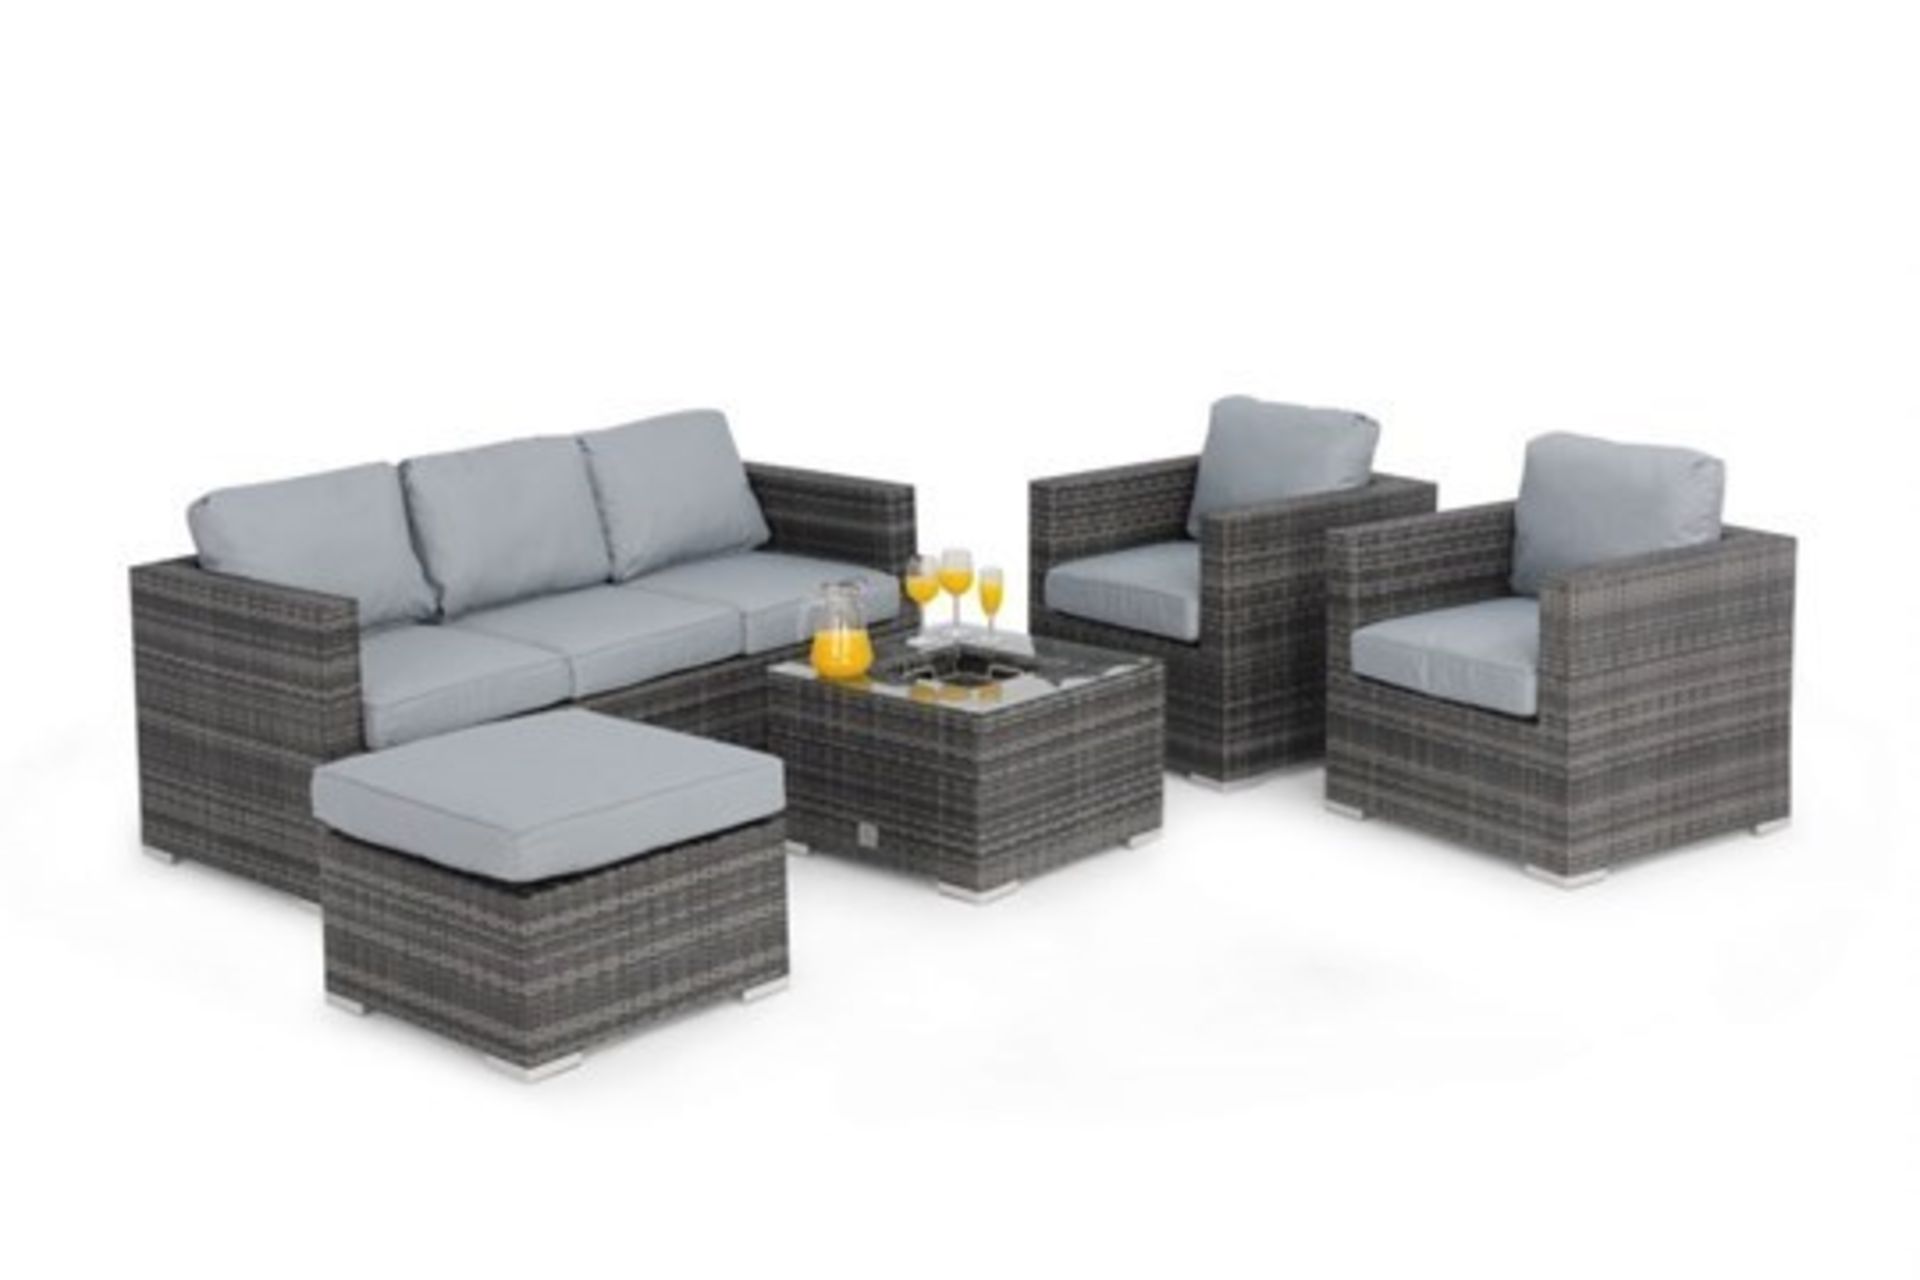 Rattan Georgia 3 Seat Outdoor Sofa Set With Ice Bucket Feature (Grey) *BRAND NEW* - Image 3 of 3